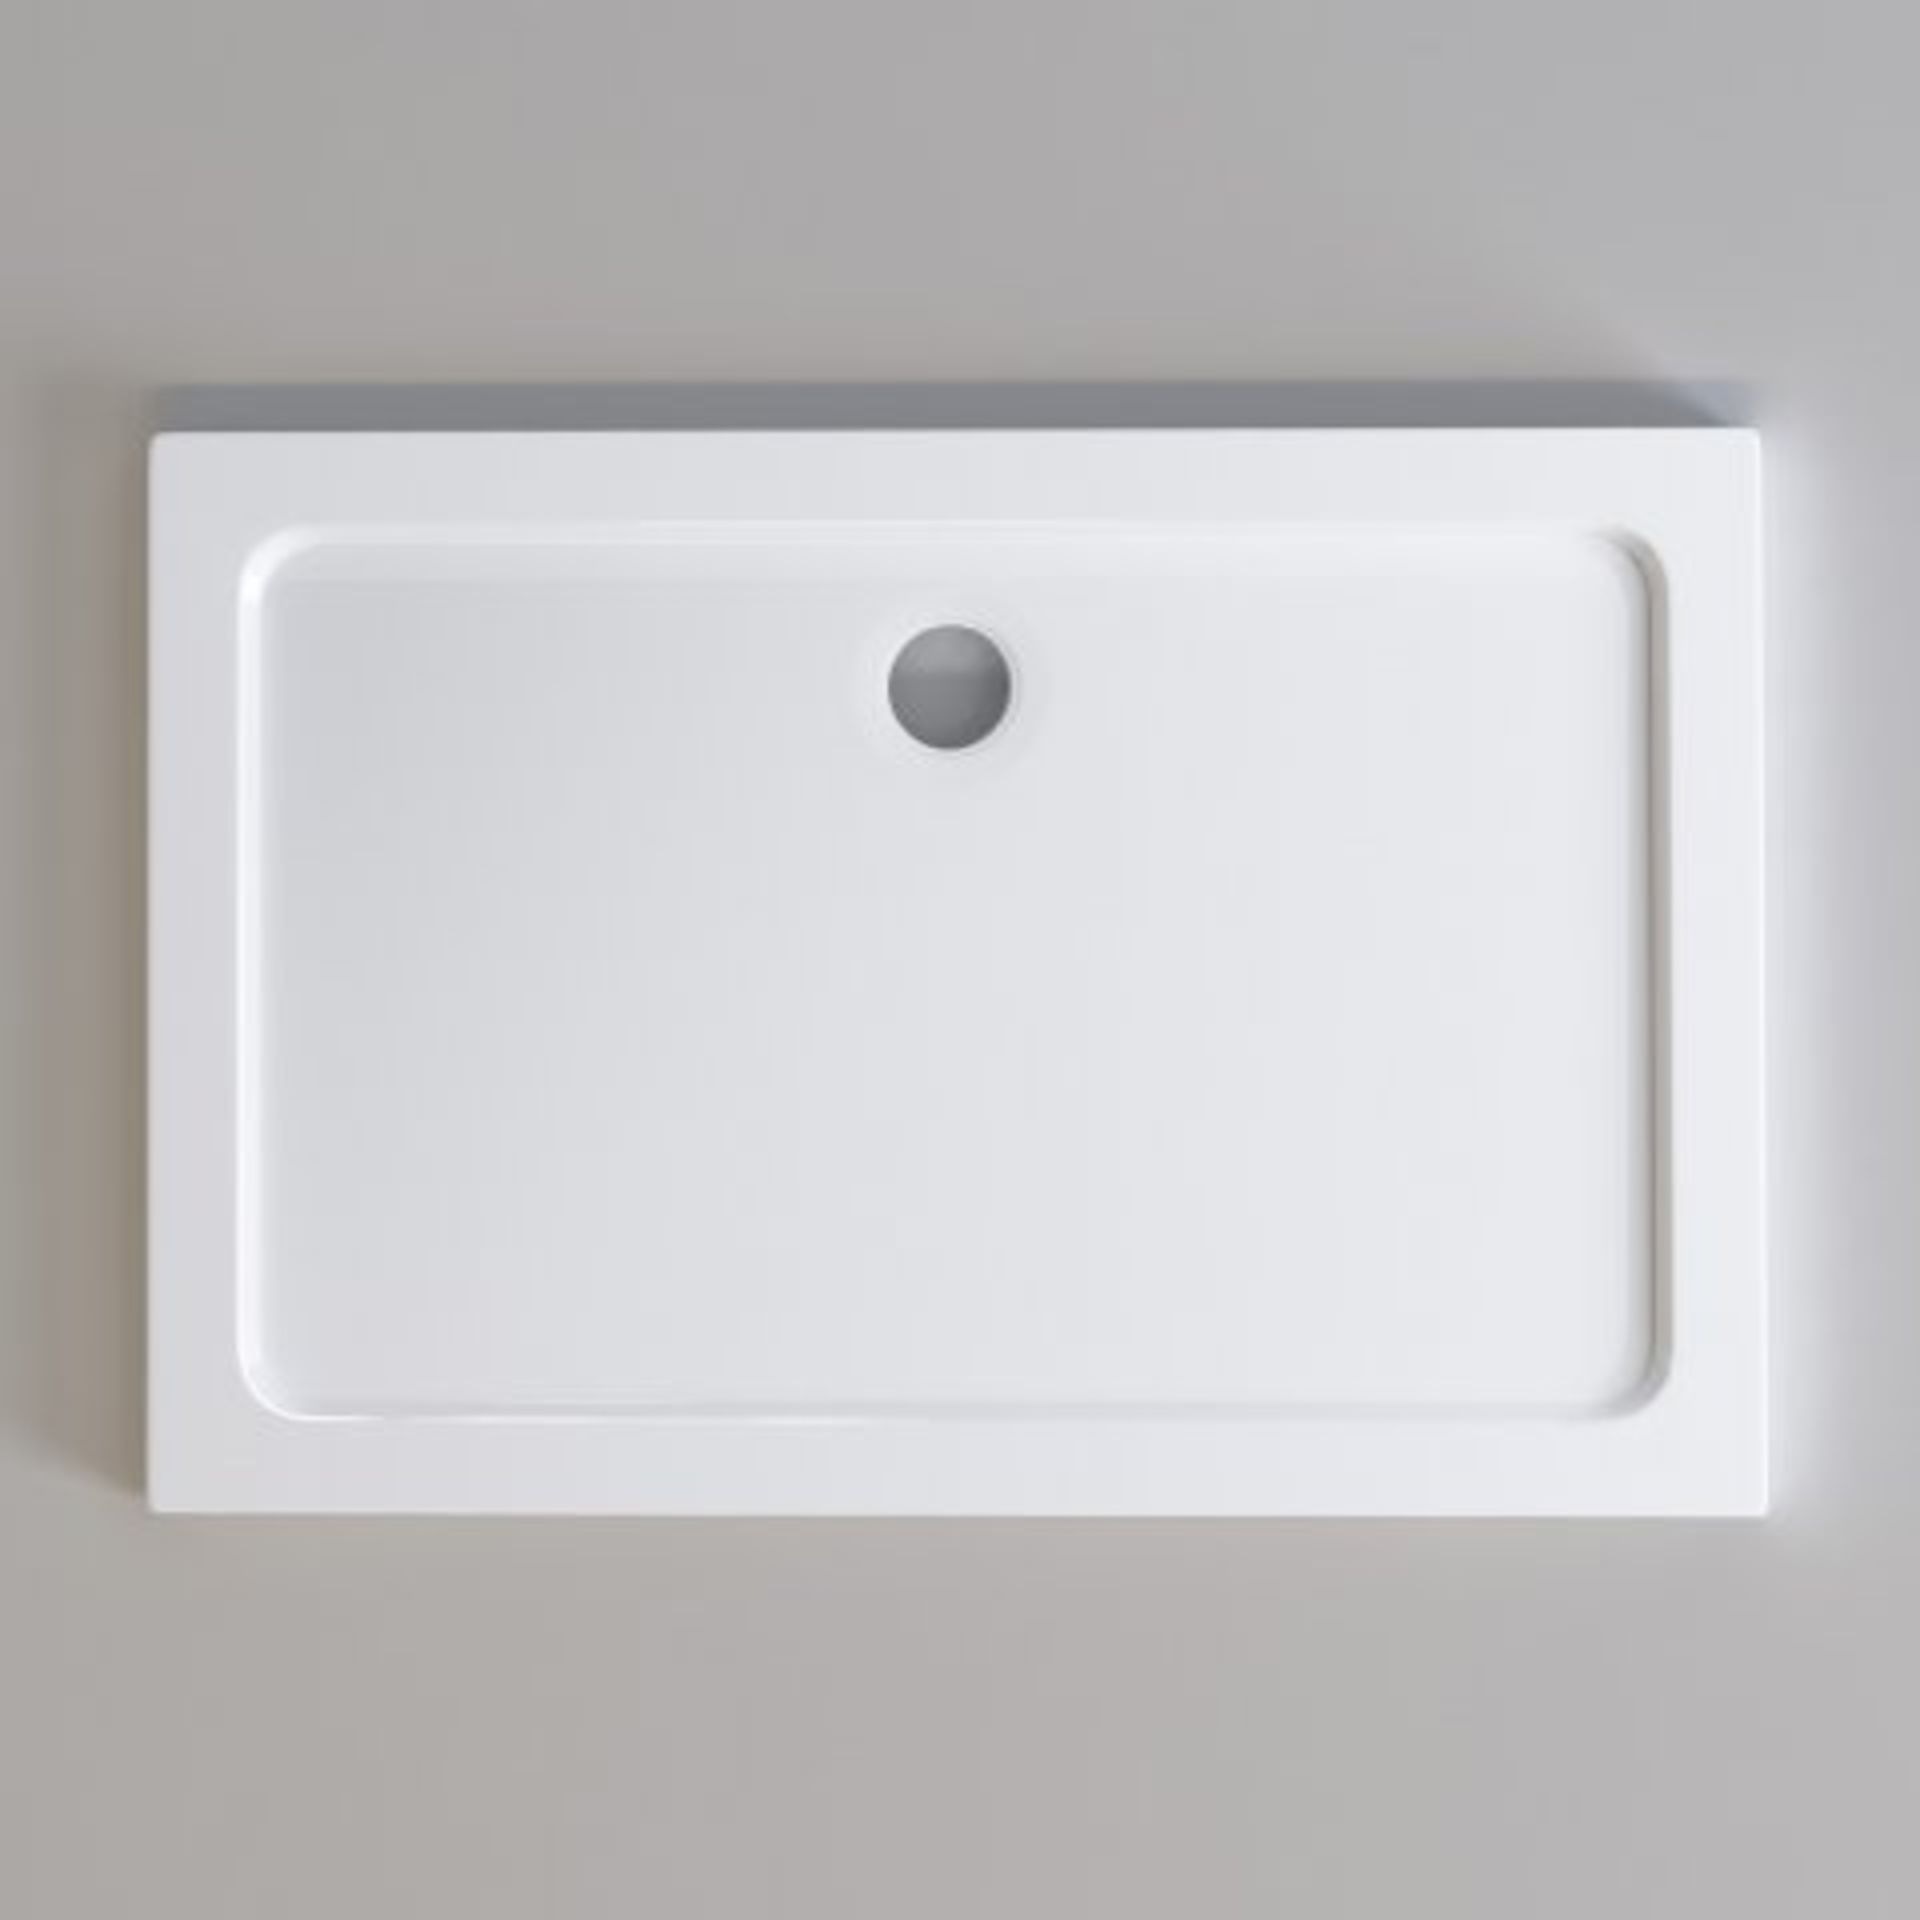 (A539) 1200x800mm Rectangular Ultra Slim Stone Shower Tray. RRP £274.99. Designed and made carefully - Image 2 of 2